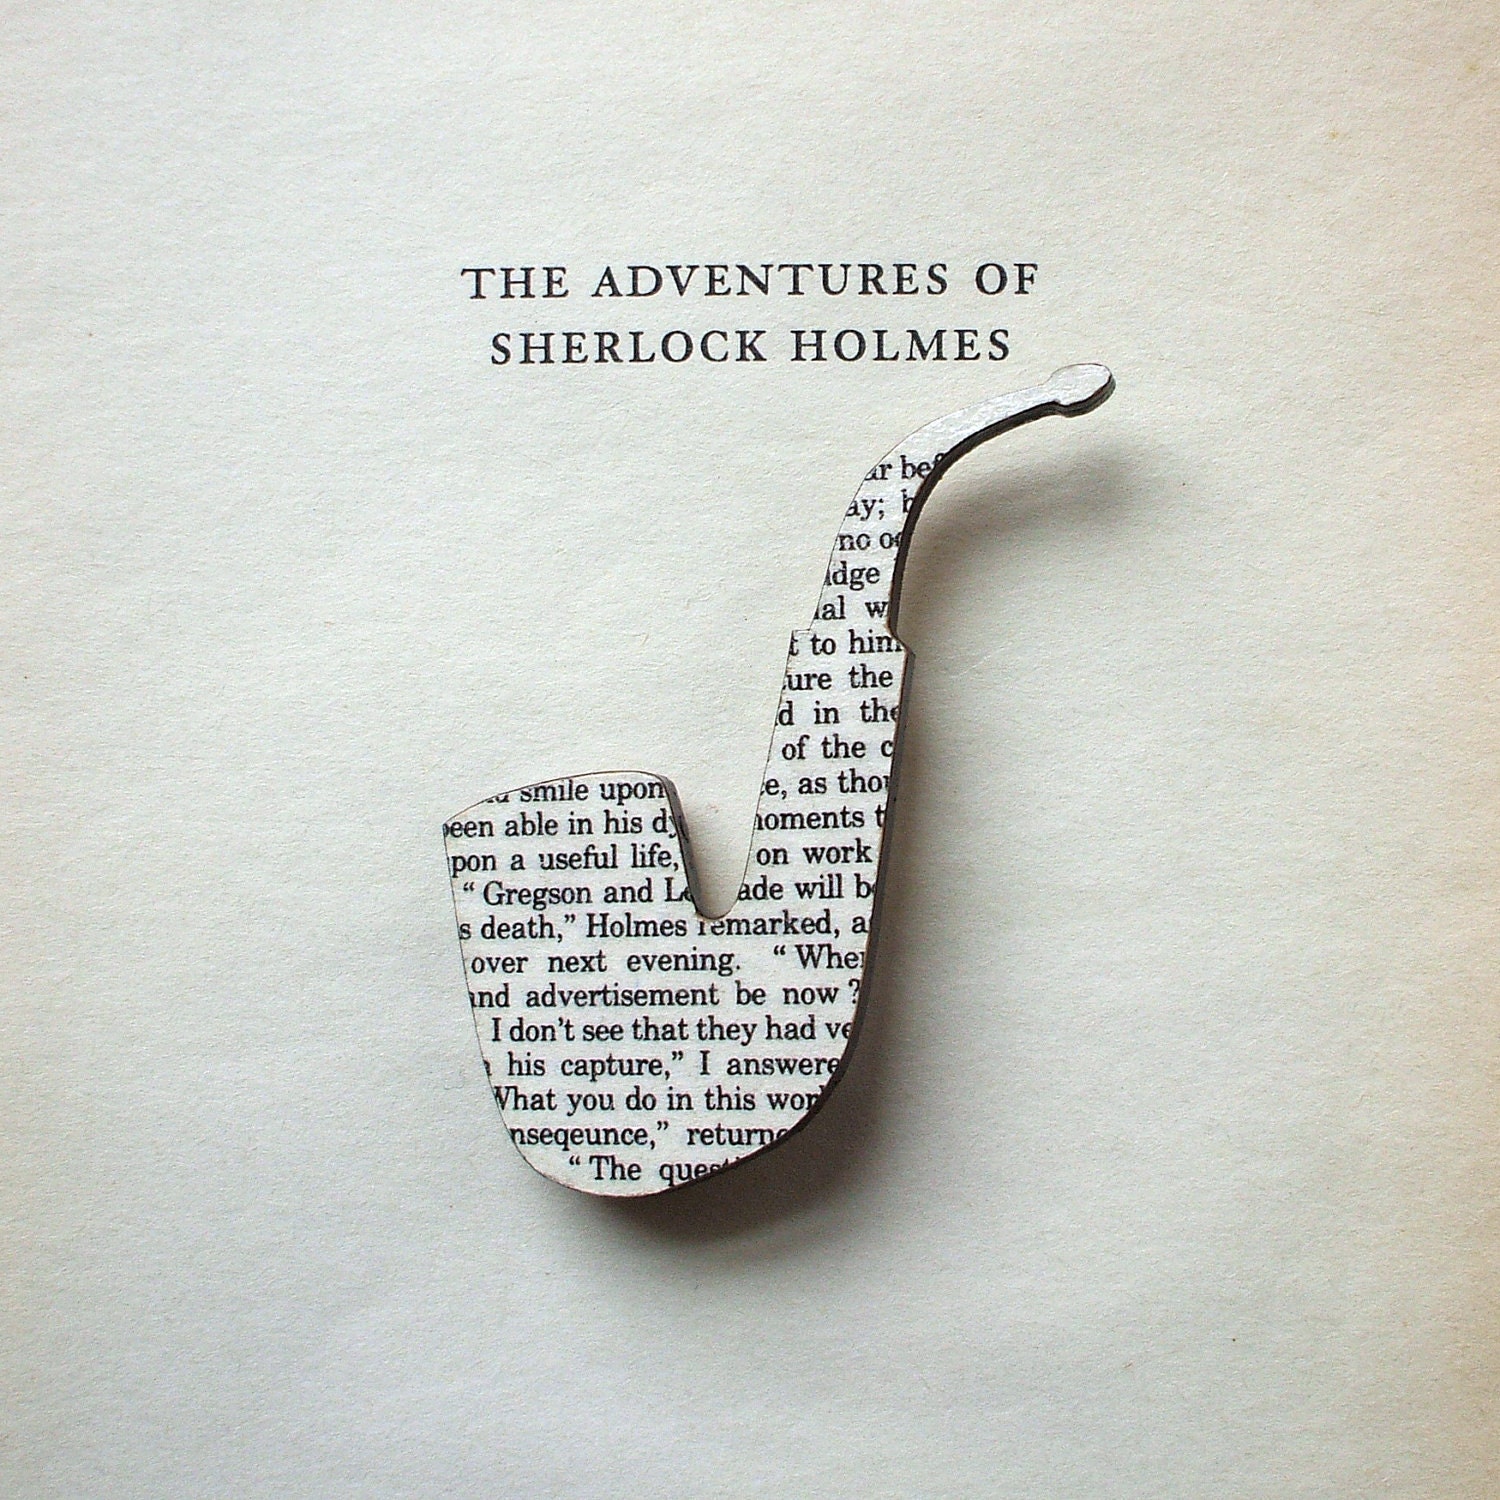 Sherlock Holmes - Pipe brooch. Classic book brooches made with original pages.